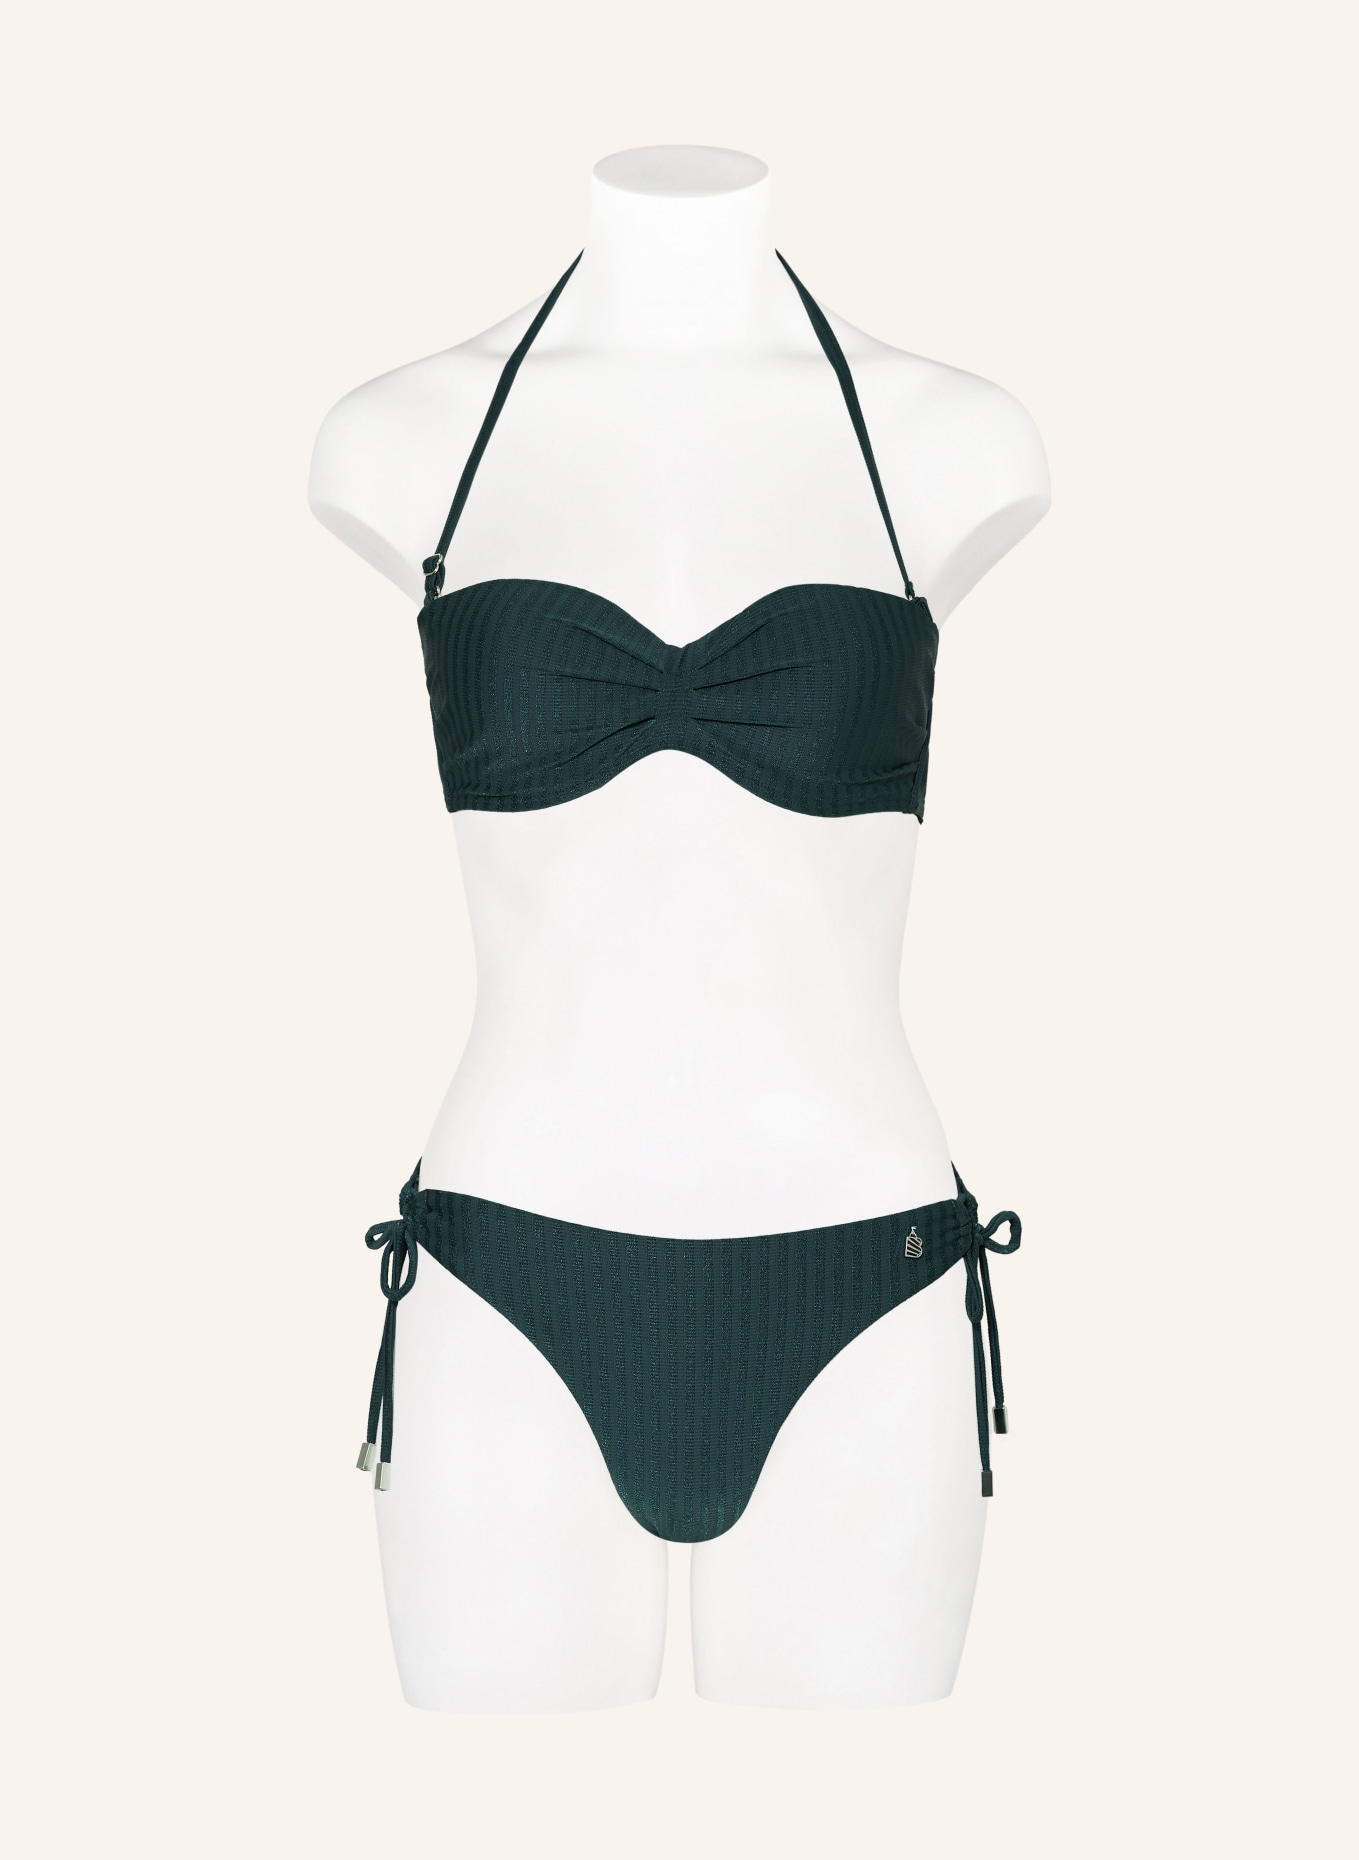 BEACHLIFE Underwired bikini top REFLECTING POND, Color: TEAL (Image 4)